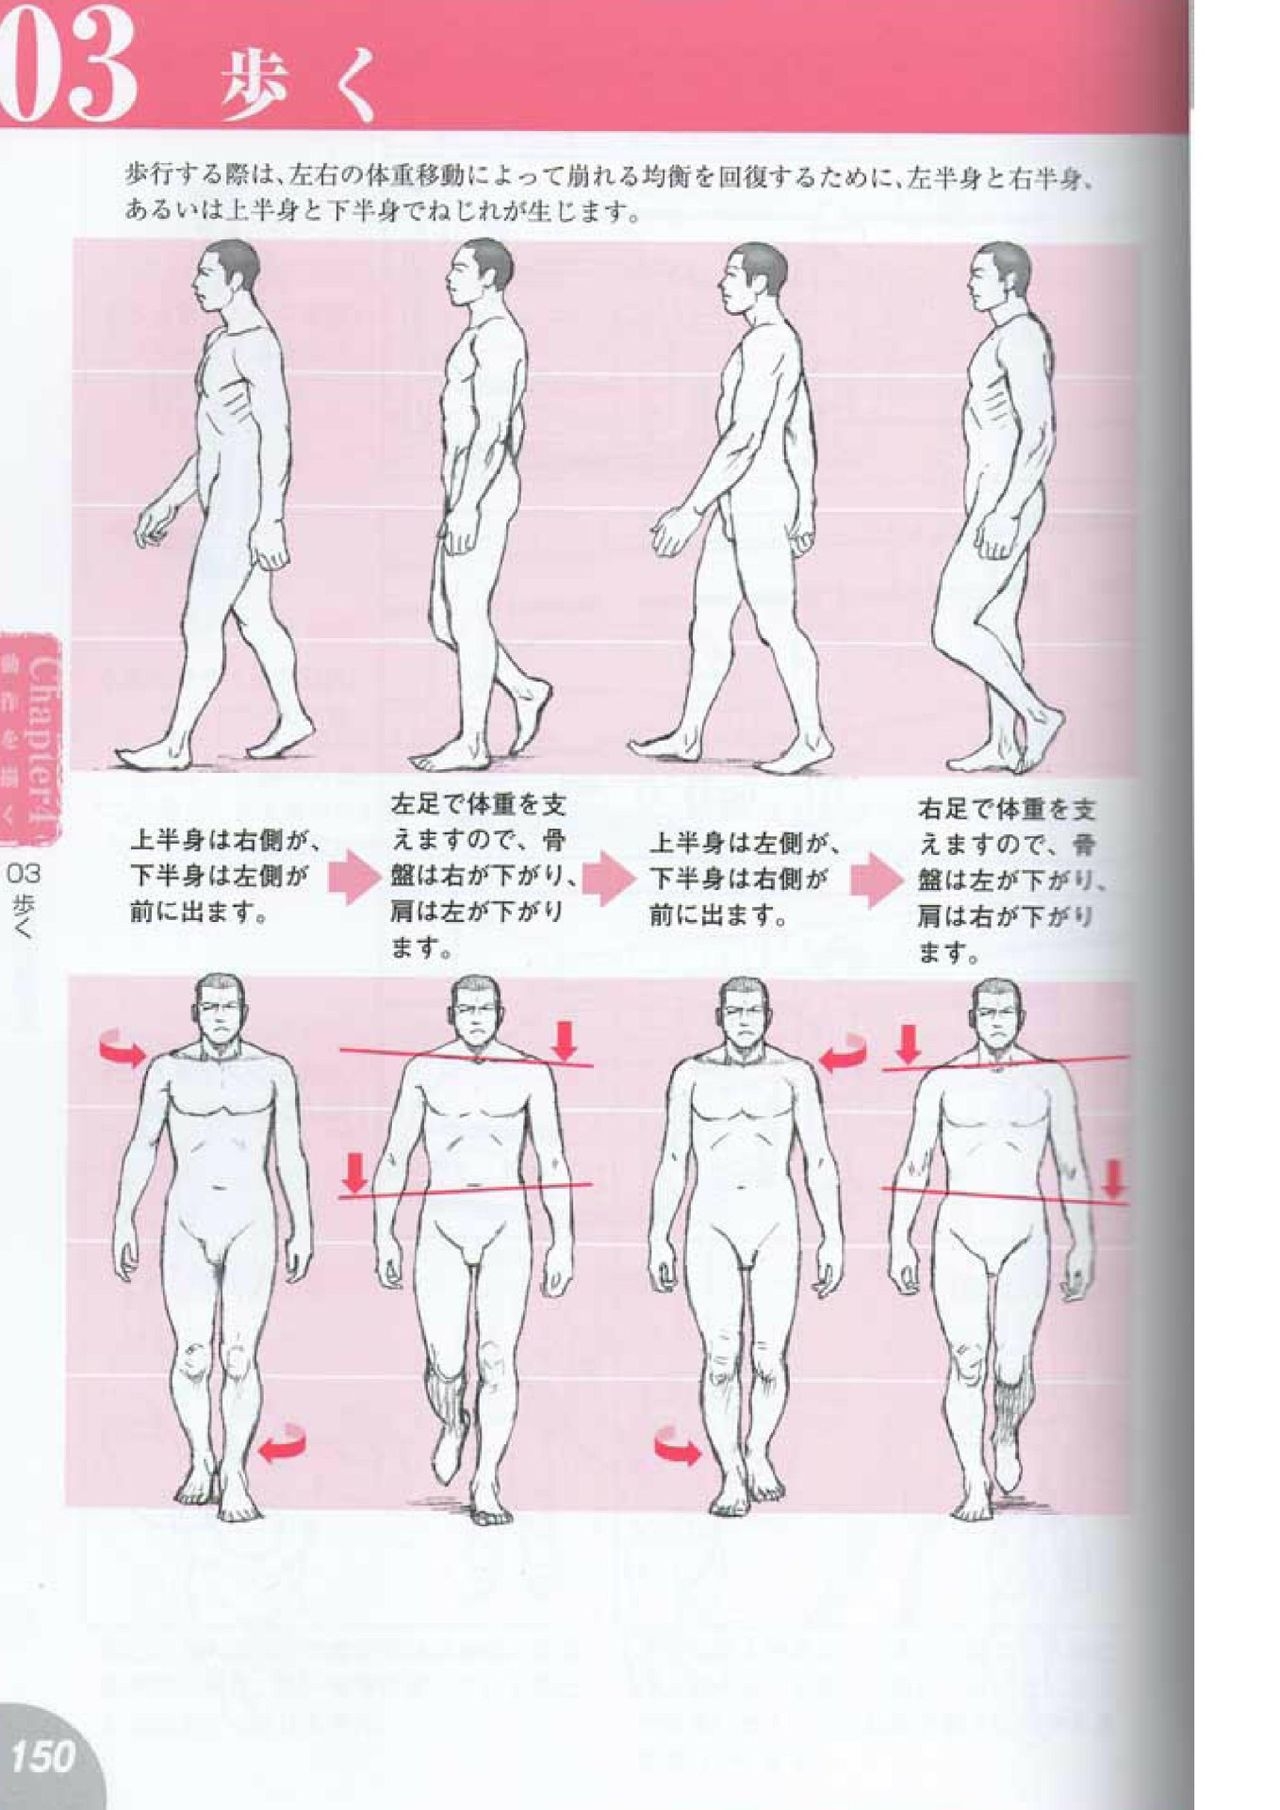 How to draw a character drawing from a human anatomical chart 148